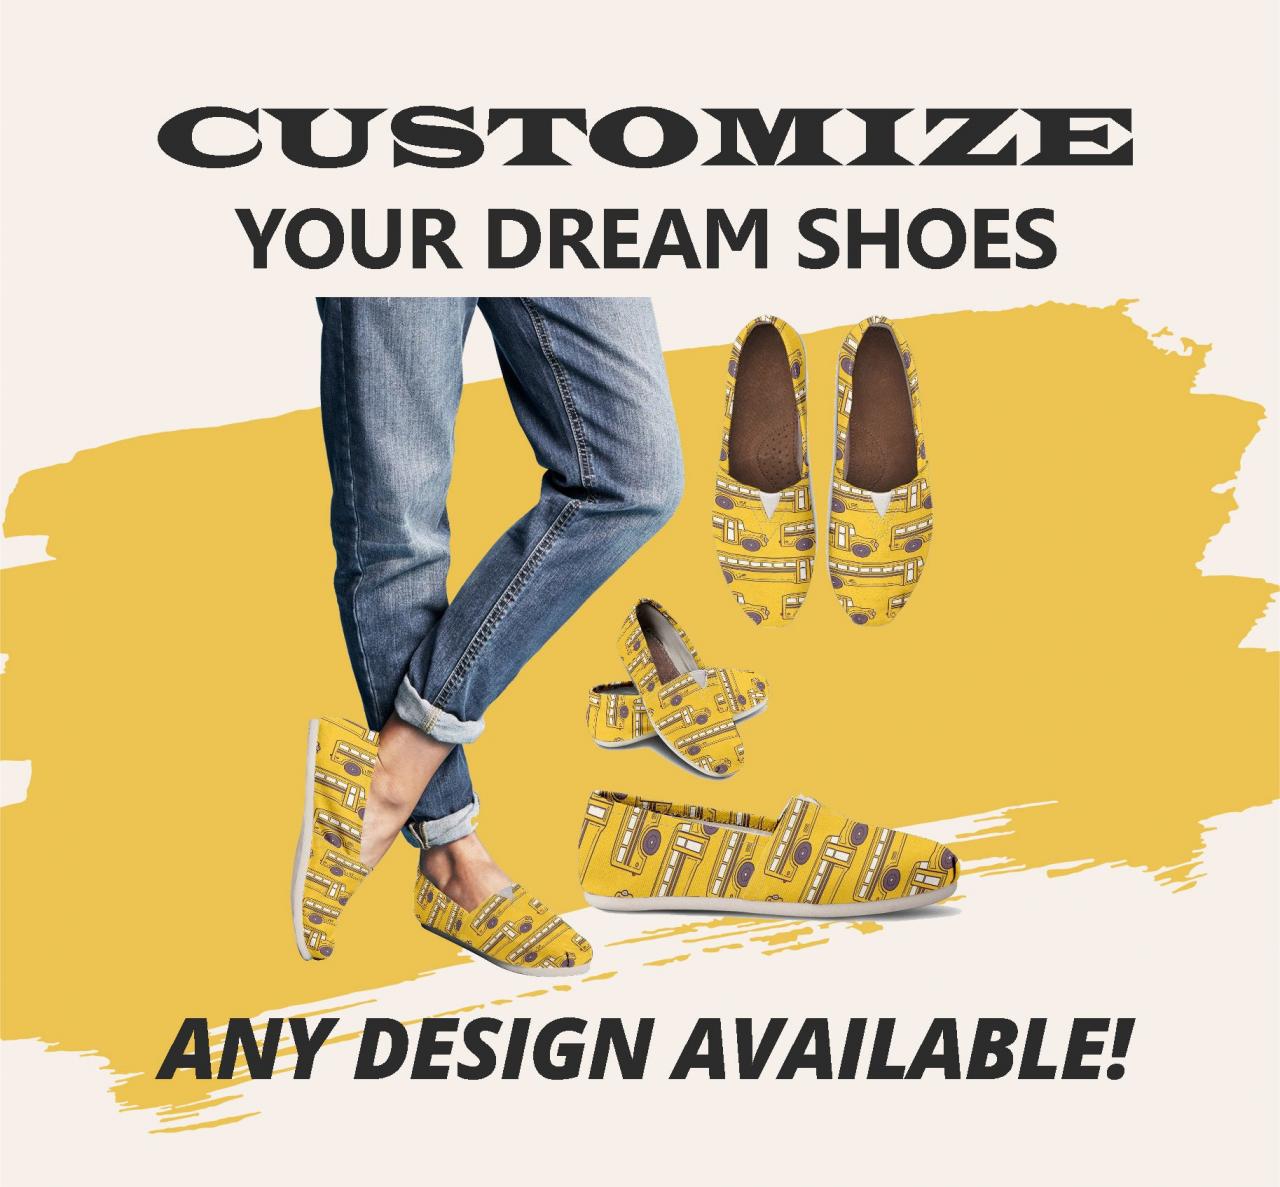 Beep Beep Casual Slip Ons Casual Women Shoes, Handmade Women Shoes, Slip On Shoes, Dream Shoes